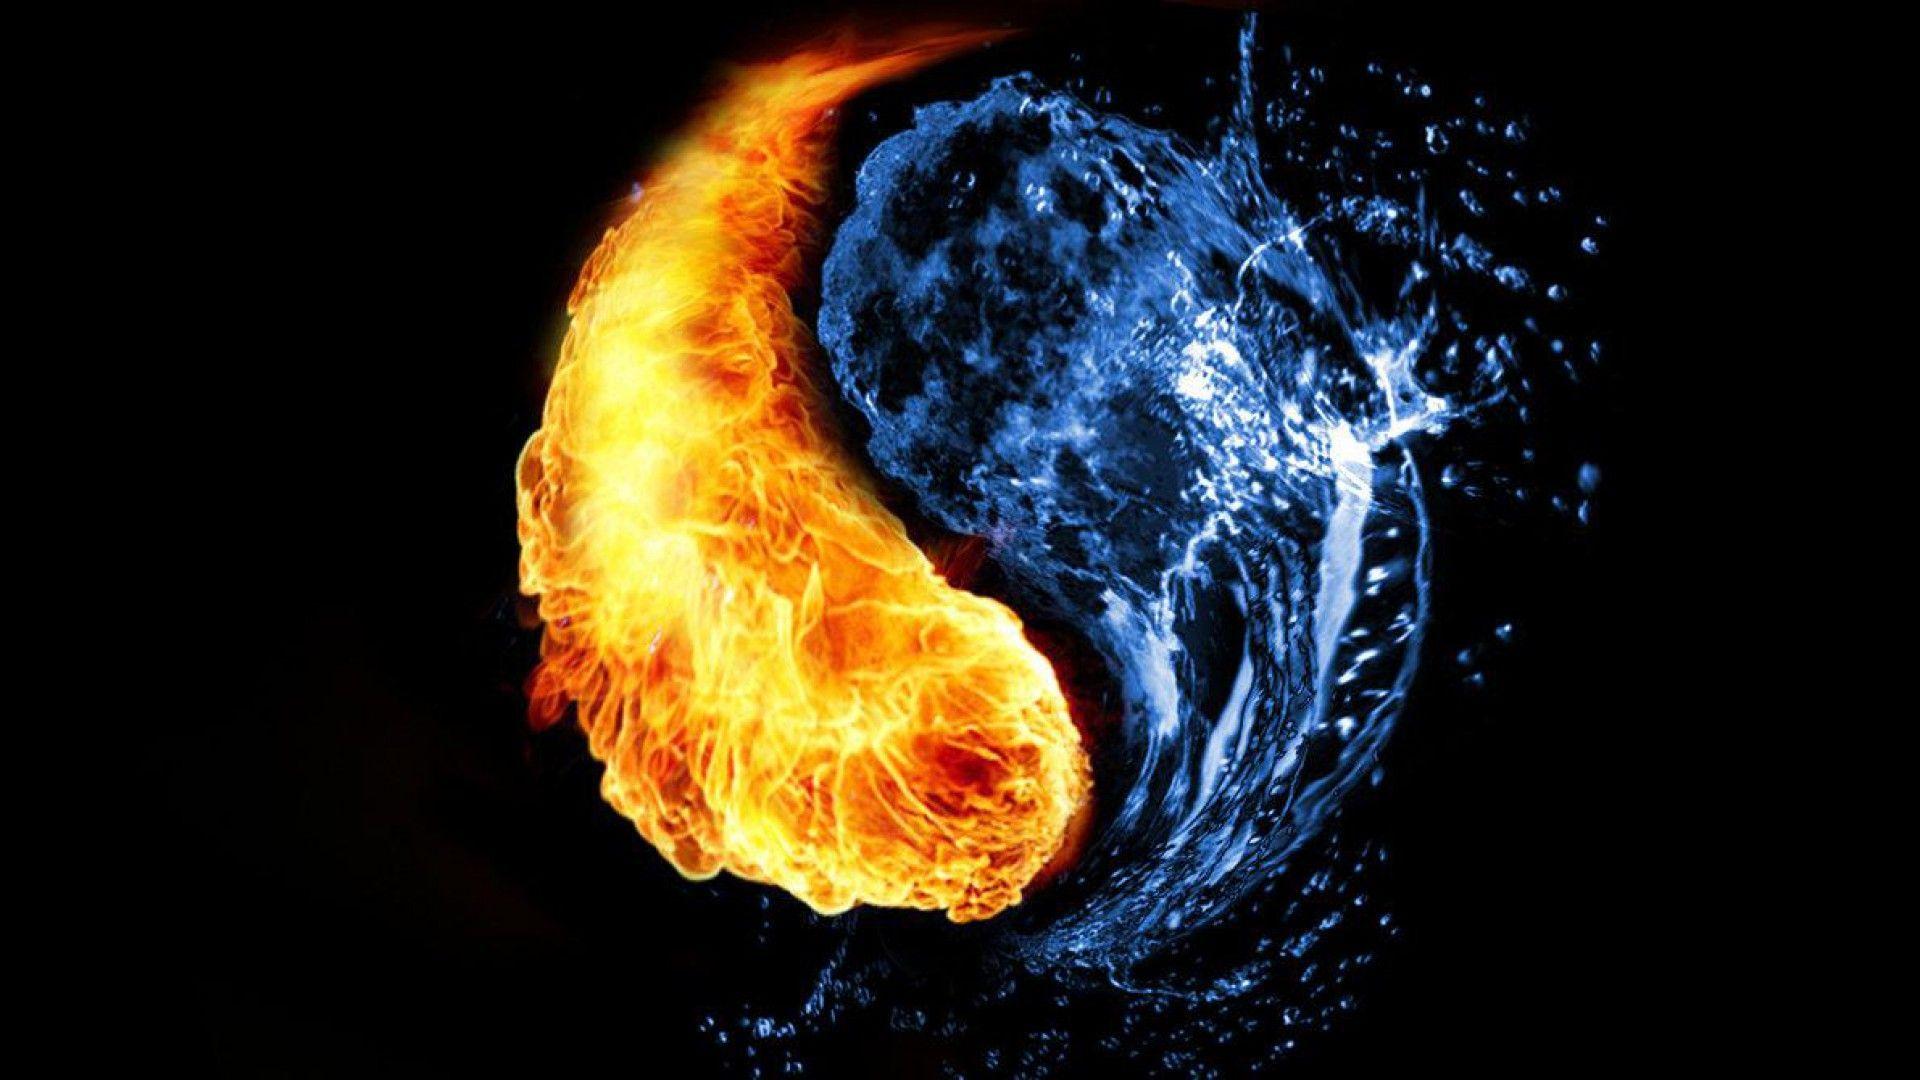 Water And Fire Wallpaper